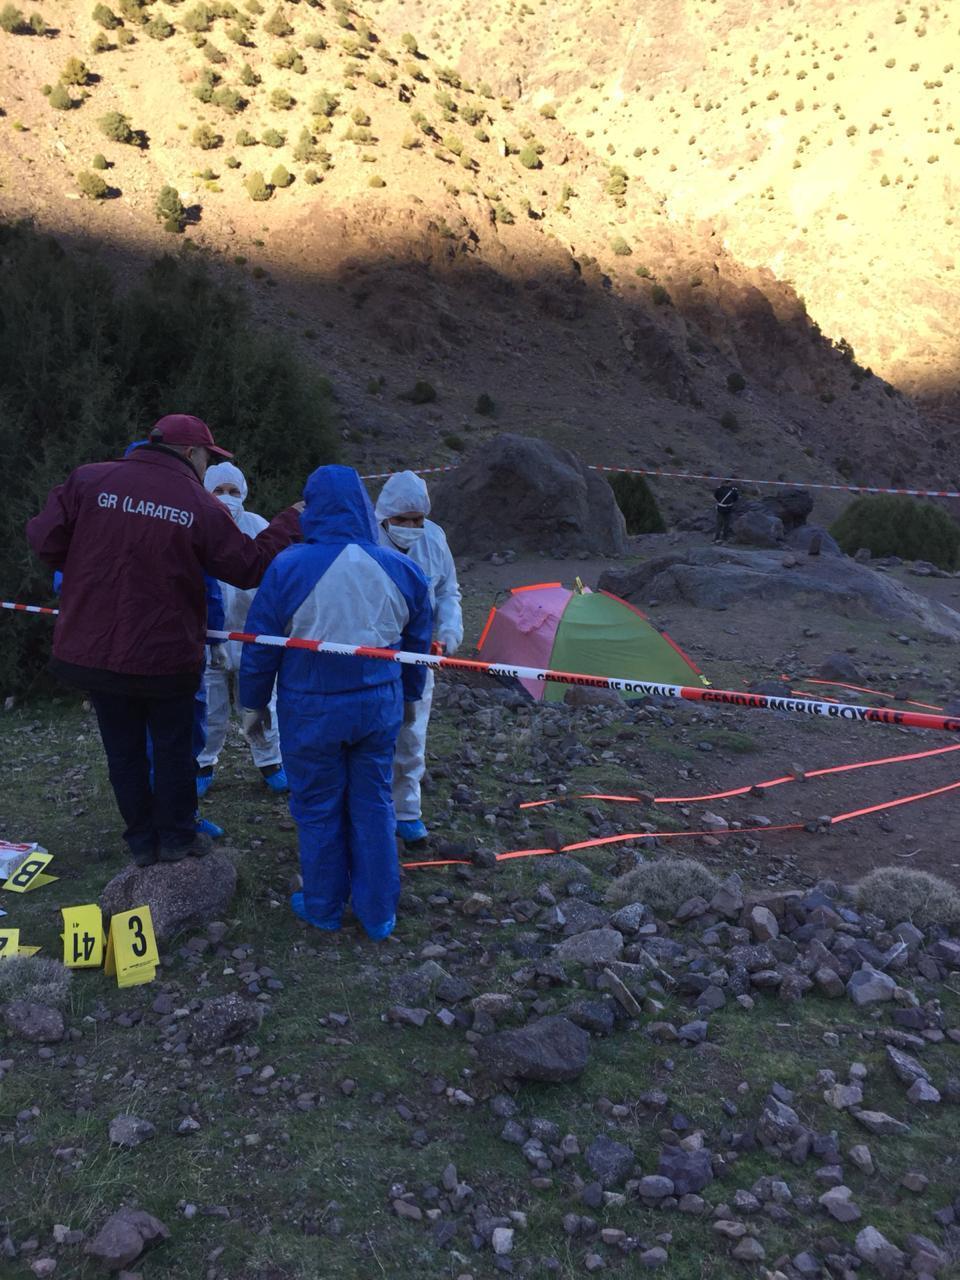 A forensic team where the bodies of two Scandinavian women tourists were found near Imlil in the Atlas Mountains, Morocco